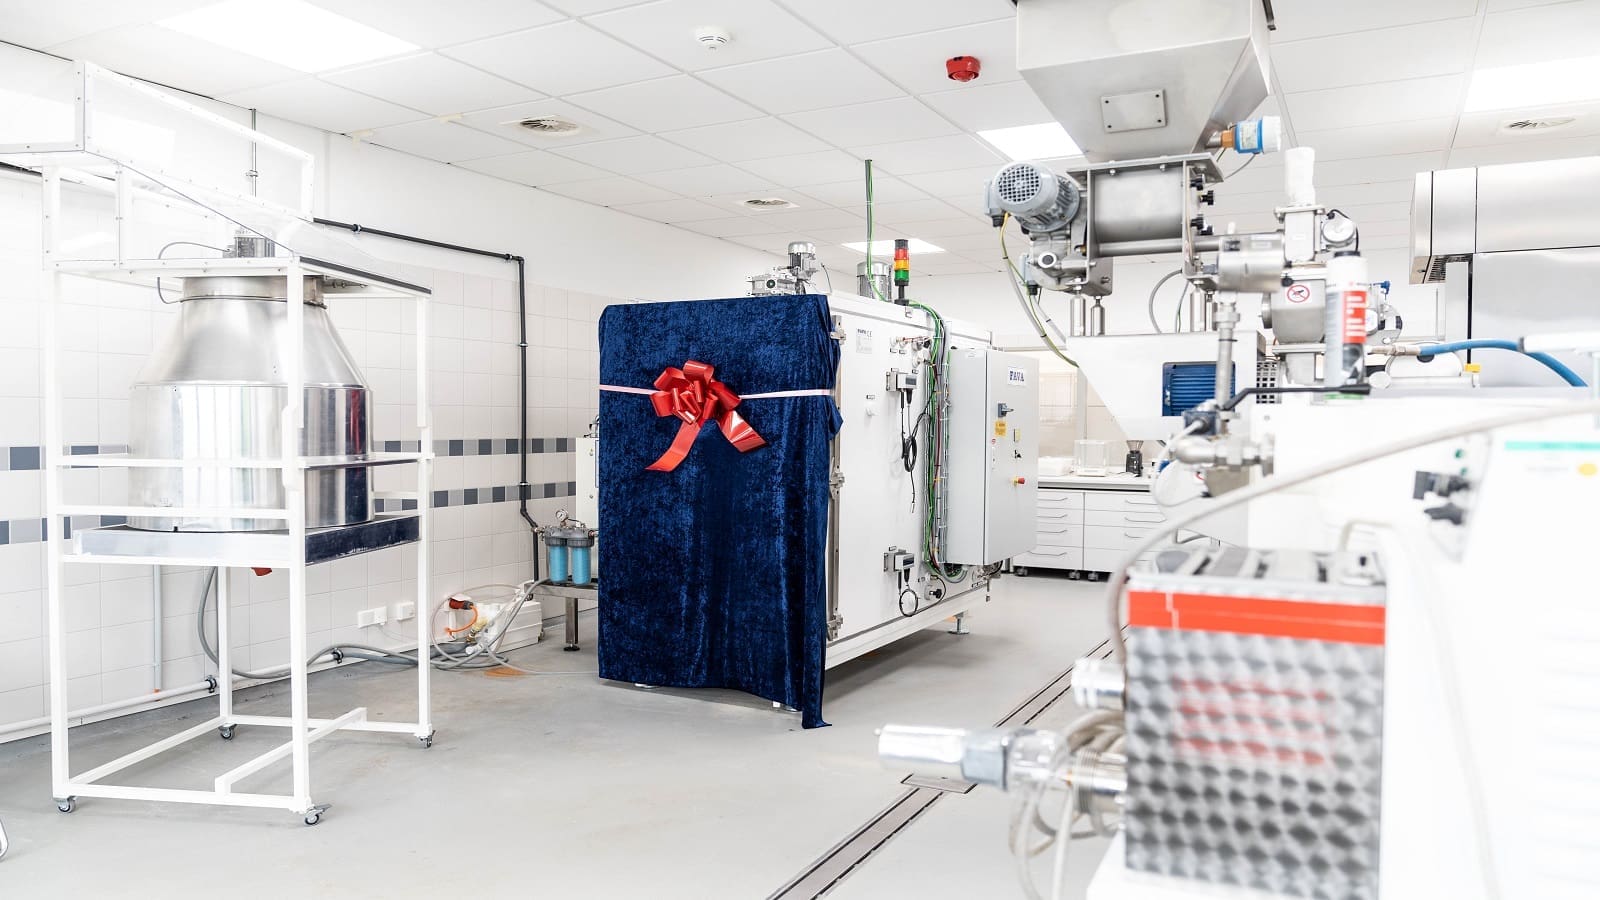 MC Mühlenchemie collaborates with Fava S.p.A on new dryer for its pasta lab